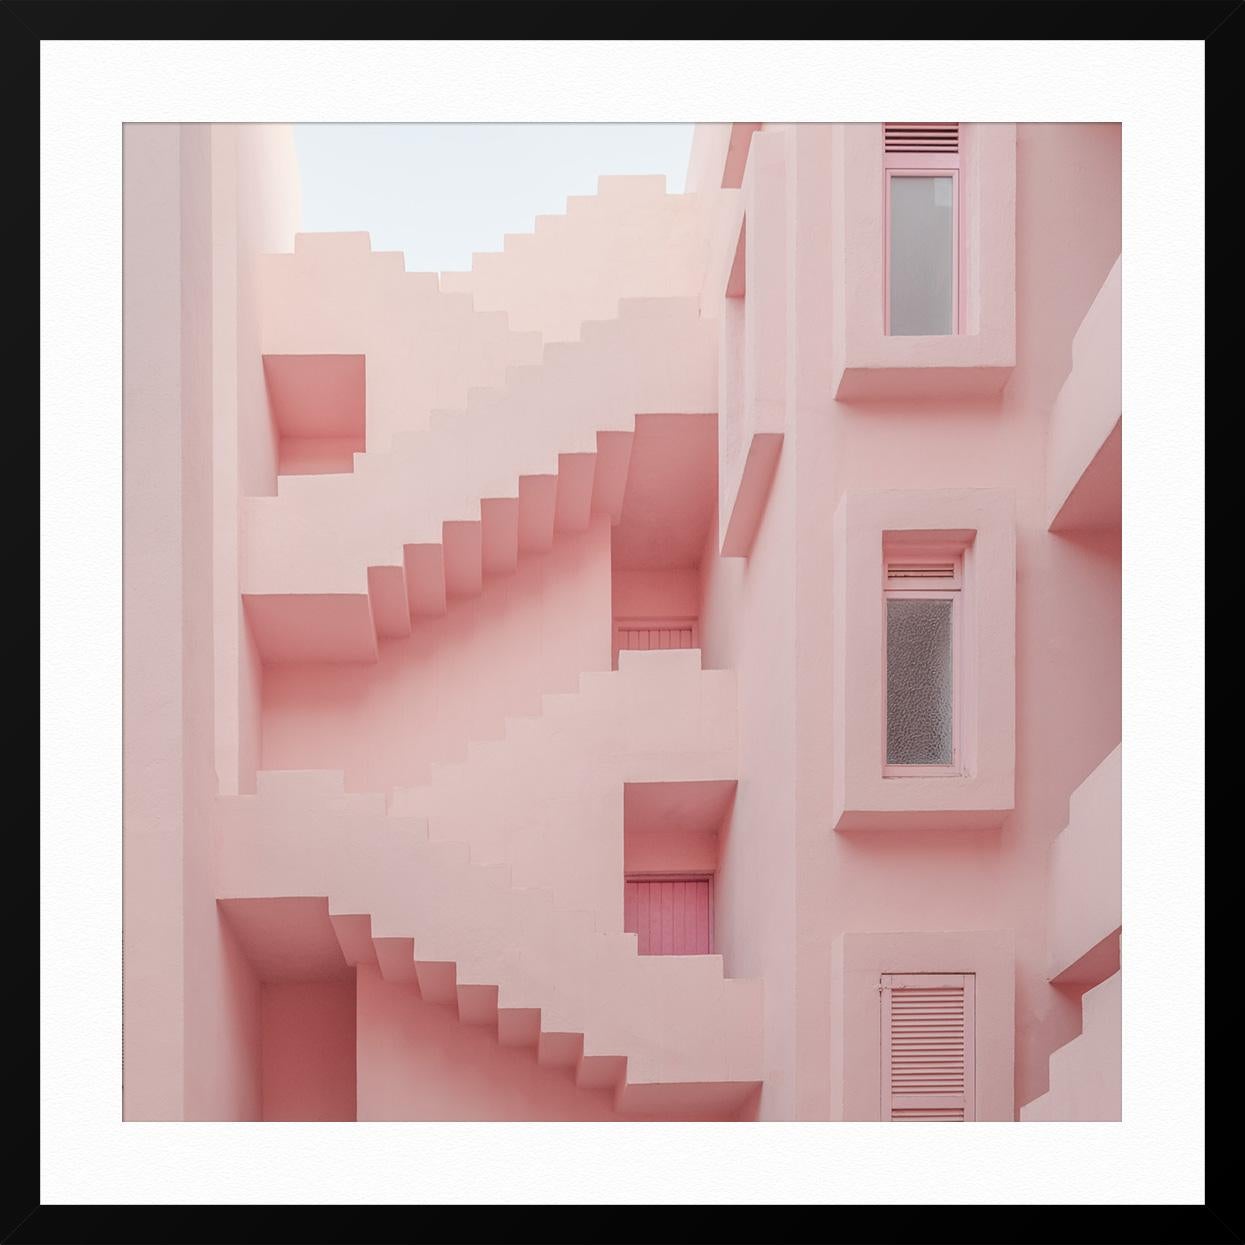 THIS PIECE IS AVAILABLE FRAMED.  Please reach out to the gallery for additional information. 

ABOUT THIS PIECE: French photographer Ludwig Favre recently visited La Muralla Roja in Calpe, Spain. His pictures of architecture carry the same romantic